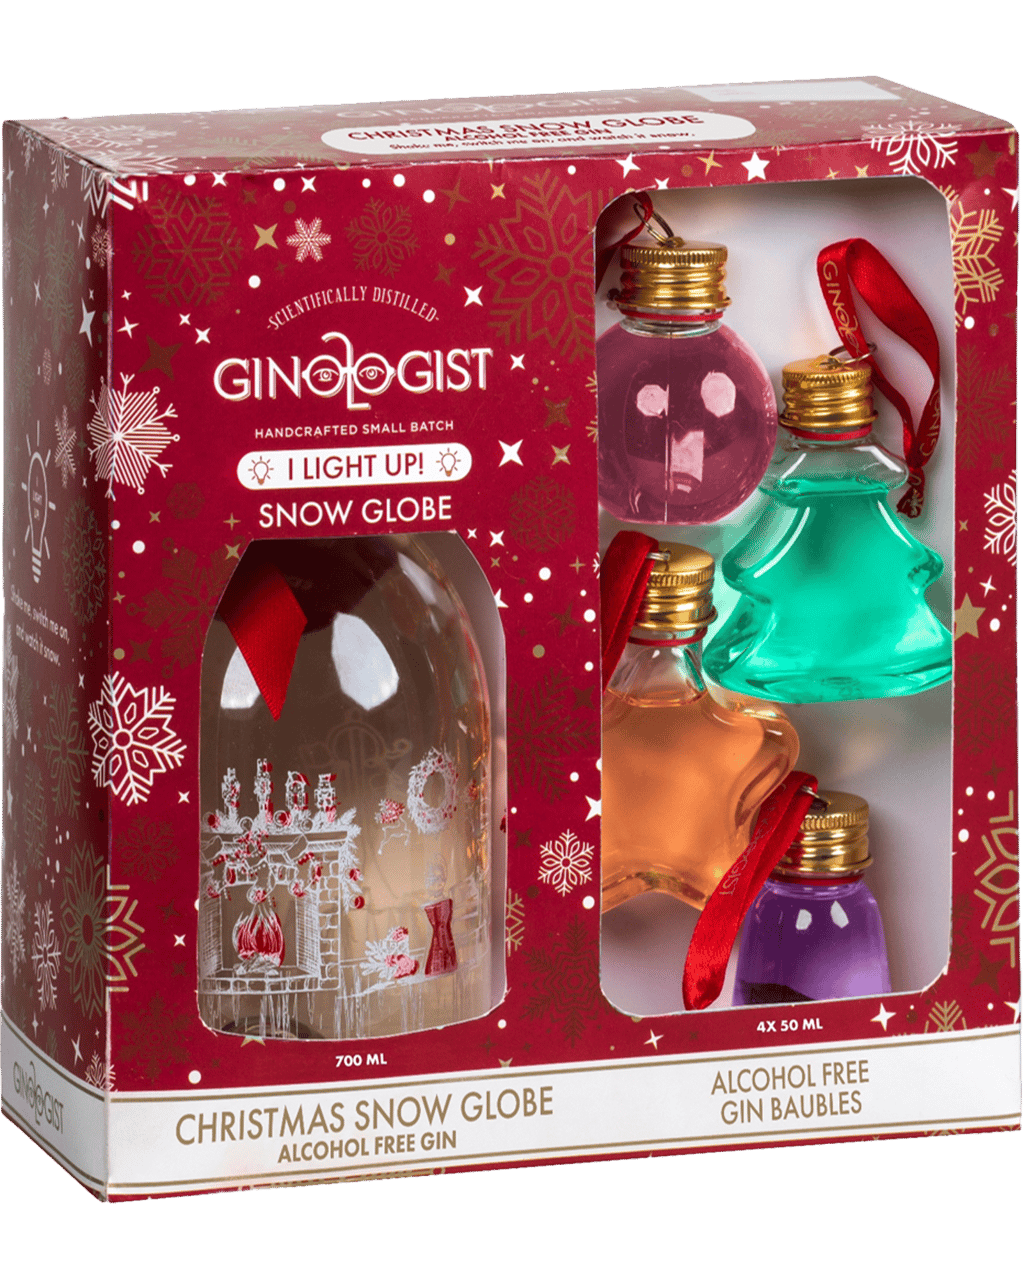 Ginologist Non Alcoholic Christmas Gin 700ml And Baubles Pack 50ml Unbeatable Prices Buy